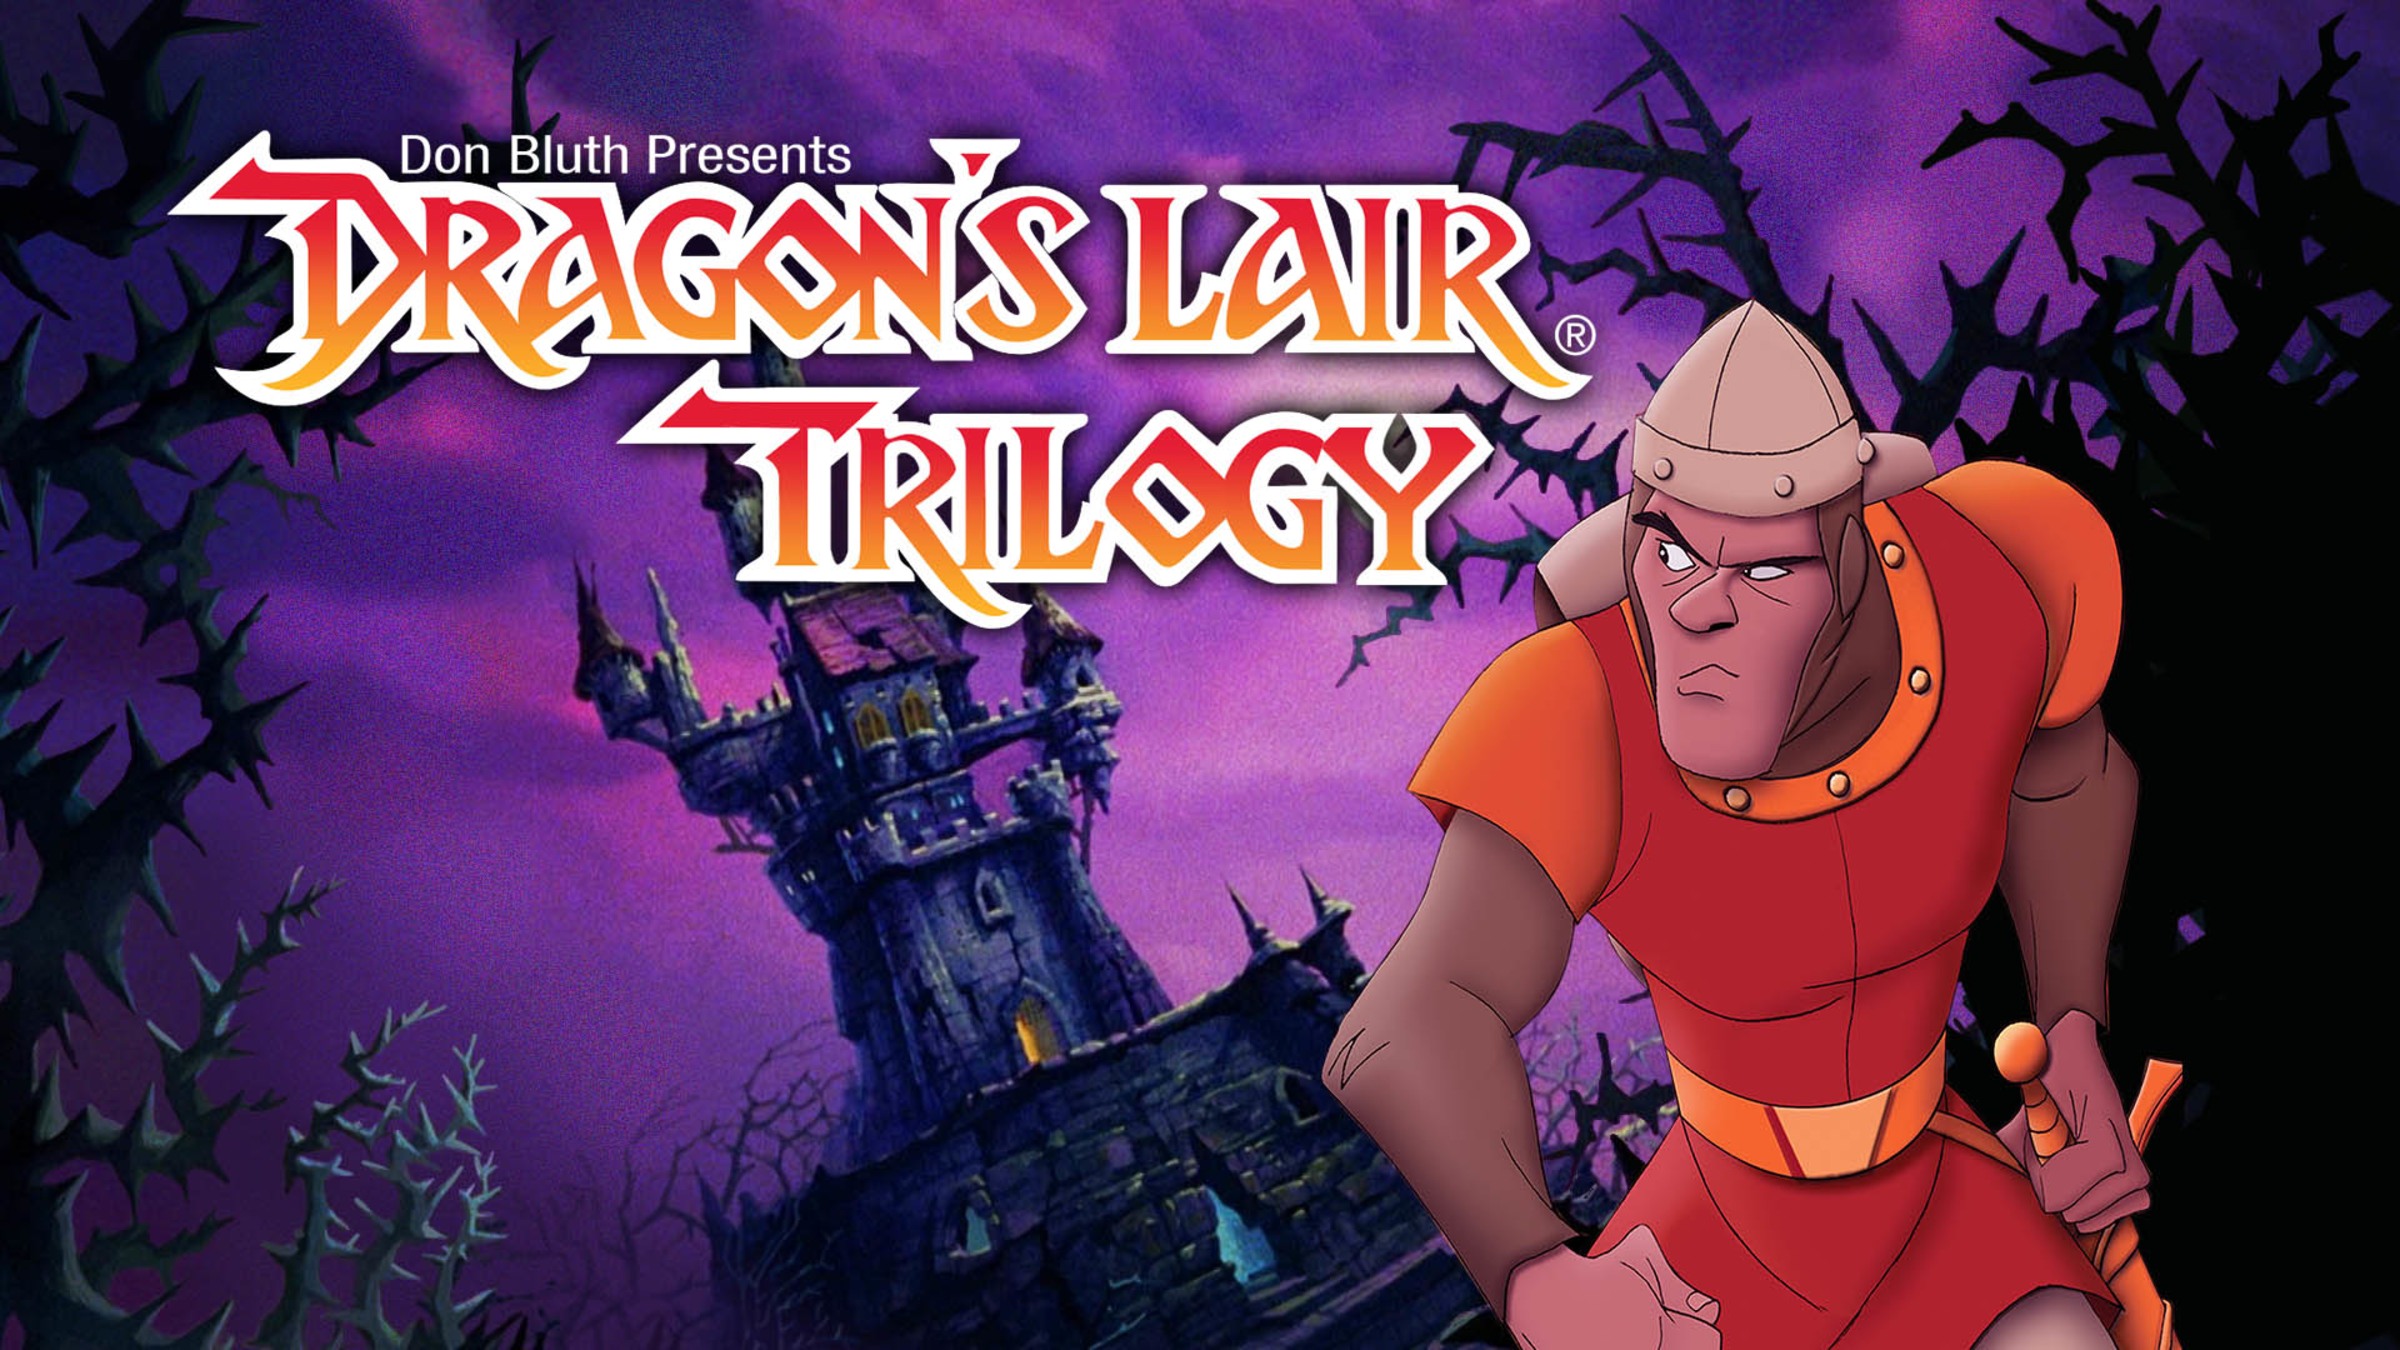 Dragon's Lair Trilogy for Nintendo Switch - Nintendo Official Site